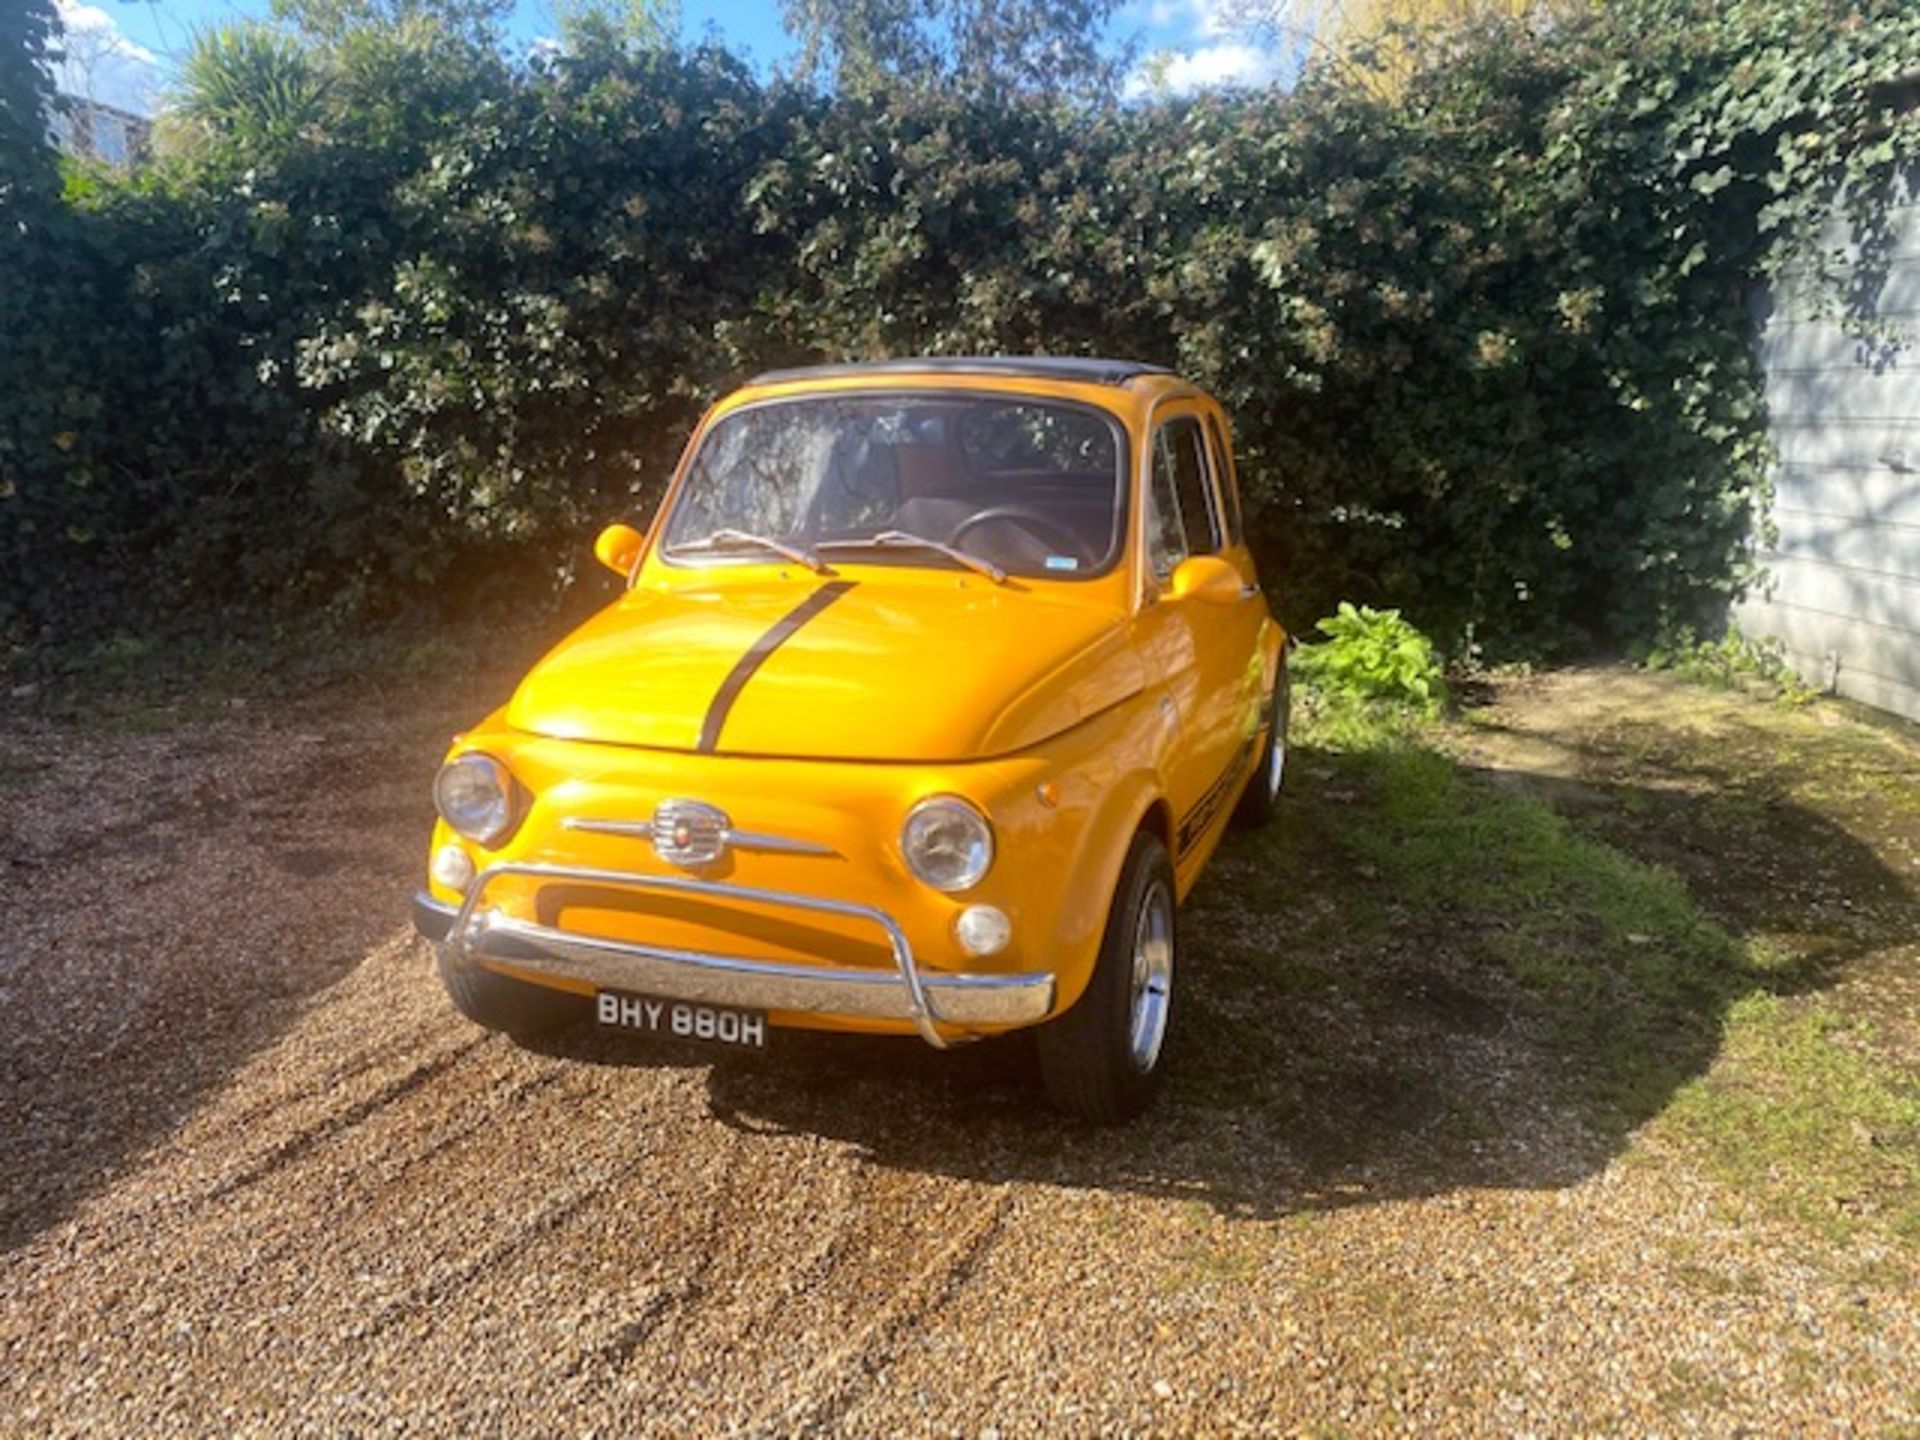 1969 Fiat 500 Abarth Evocation LHD - Image 2 of 9